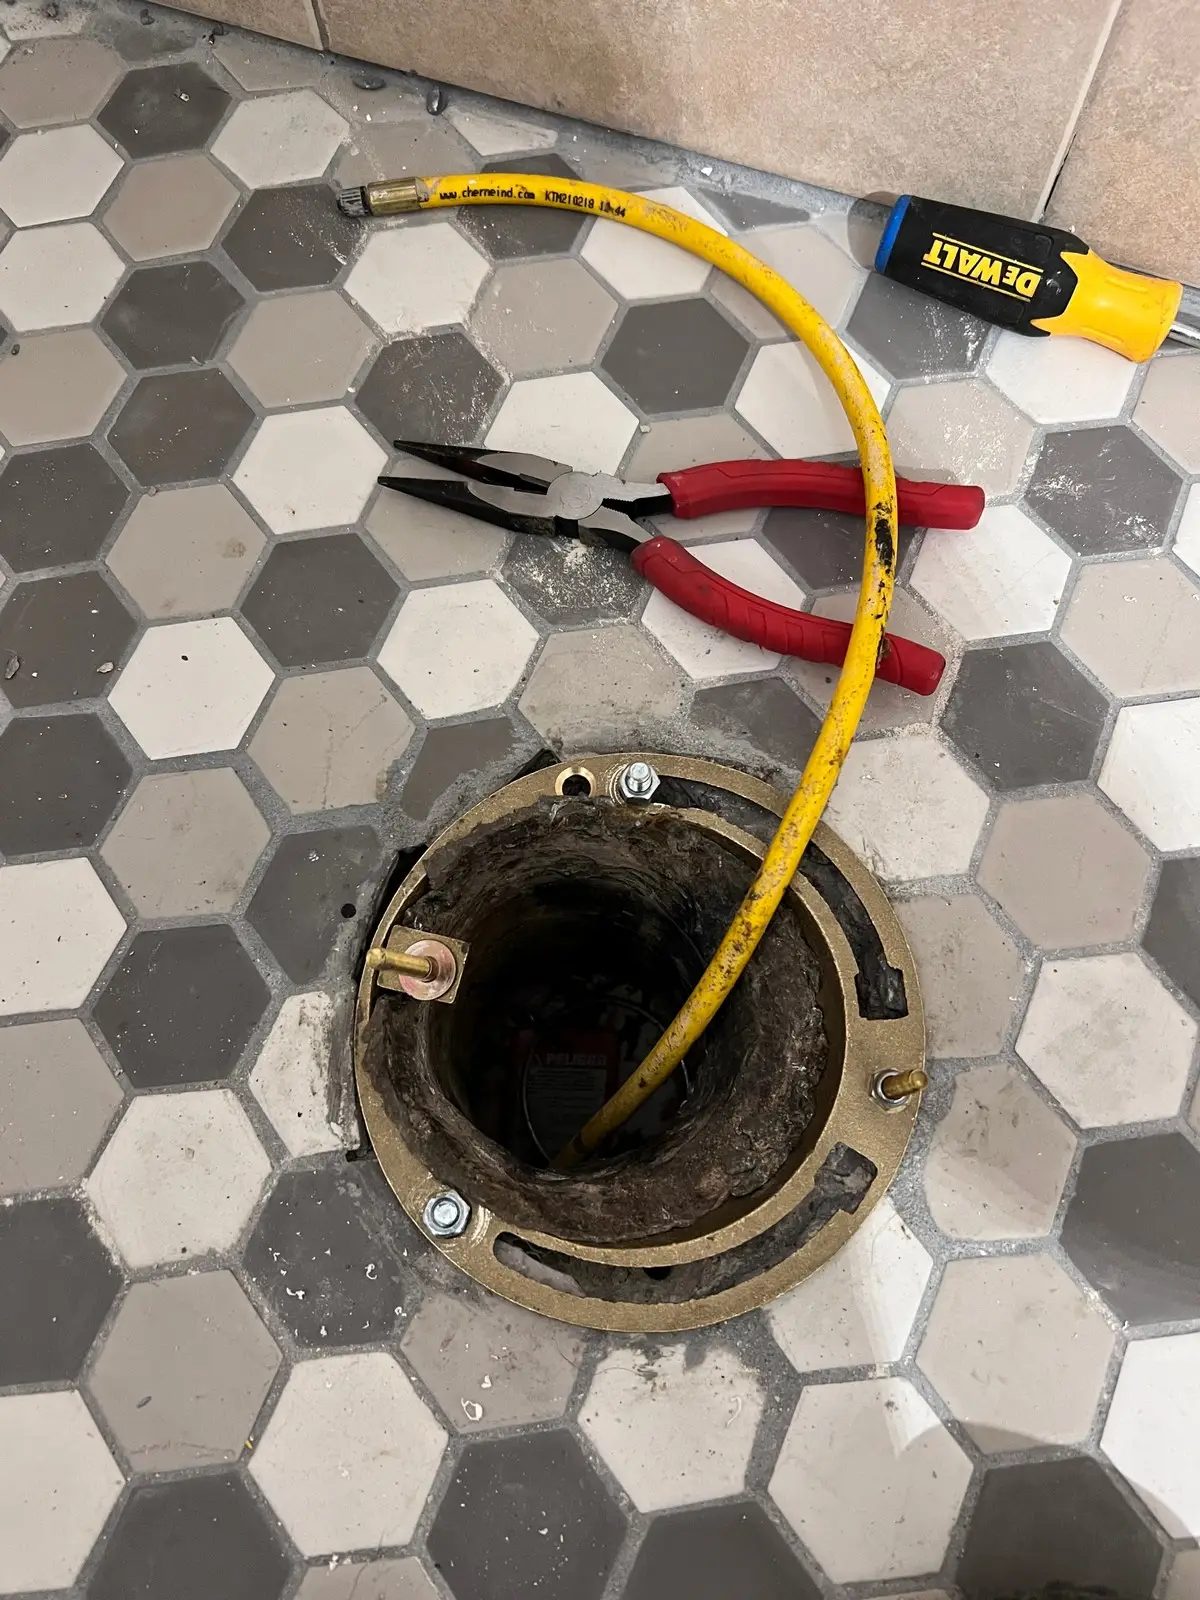 An open drain cover with a long sewer snake inserted into the hole for sewer line cleaning in San Antonio.